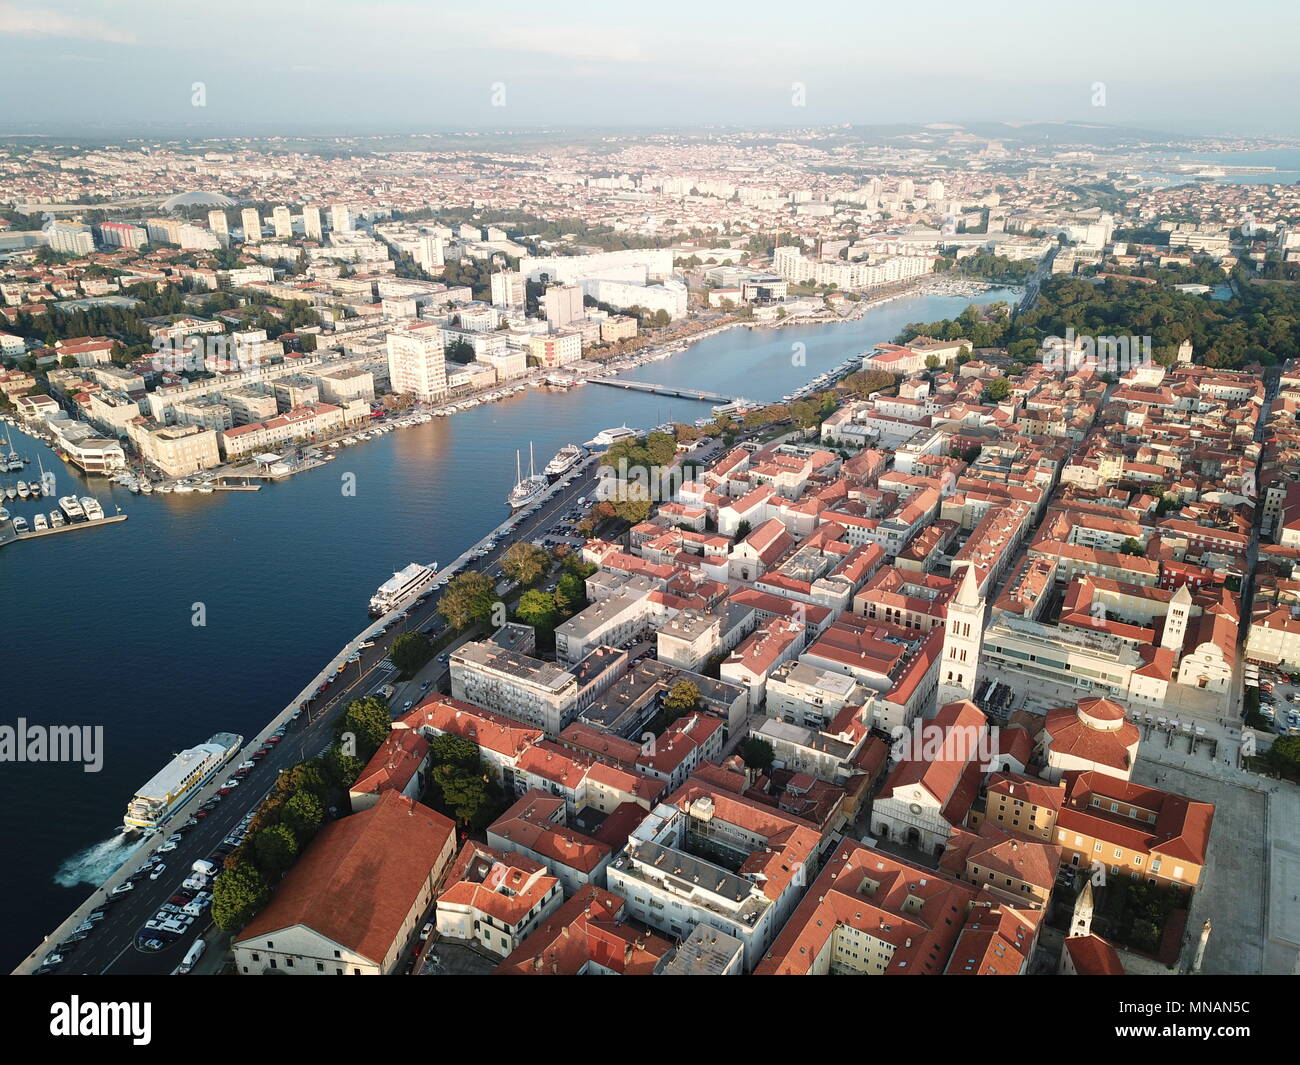 Zagreb. 13th May, 2018. Aerial photo taken on May 13, 2018 shows scenery of coastal city Zadar in Croatia. Zadar city is one of the well known Croatian tourist attractions situated on the Adriatic Sea along the west coast of the country. Credit: Gao Lei/Xinhua/Alamy Live News Stock Photo